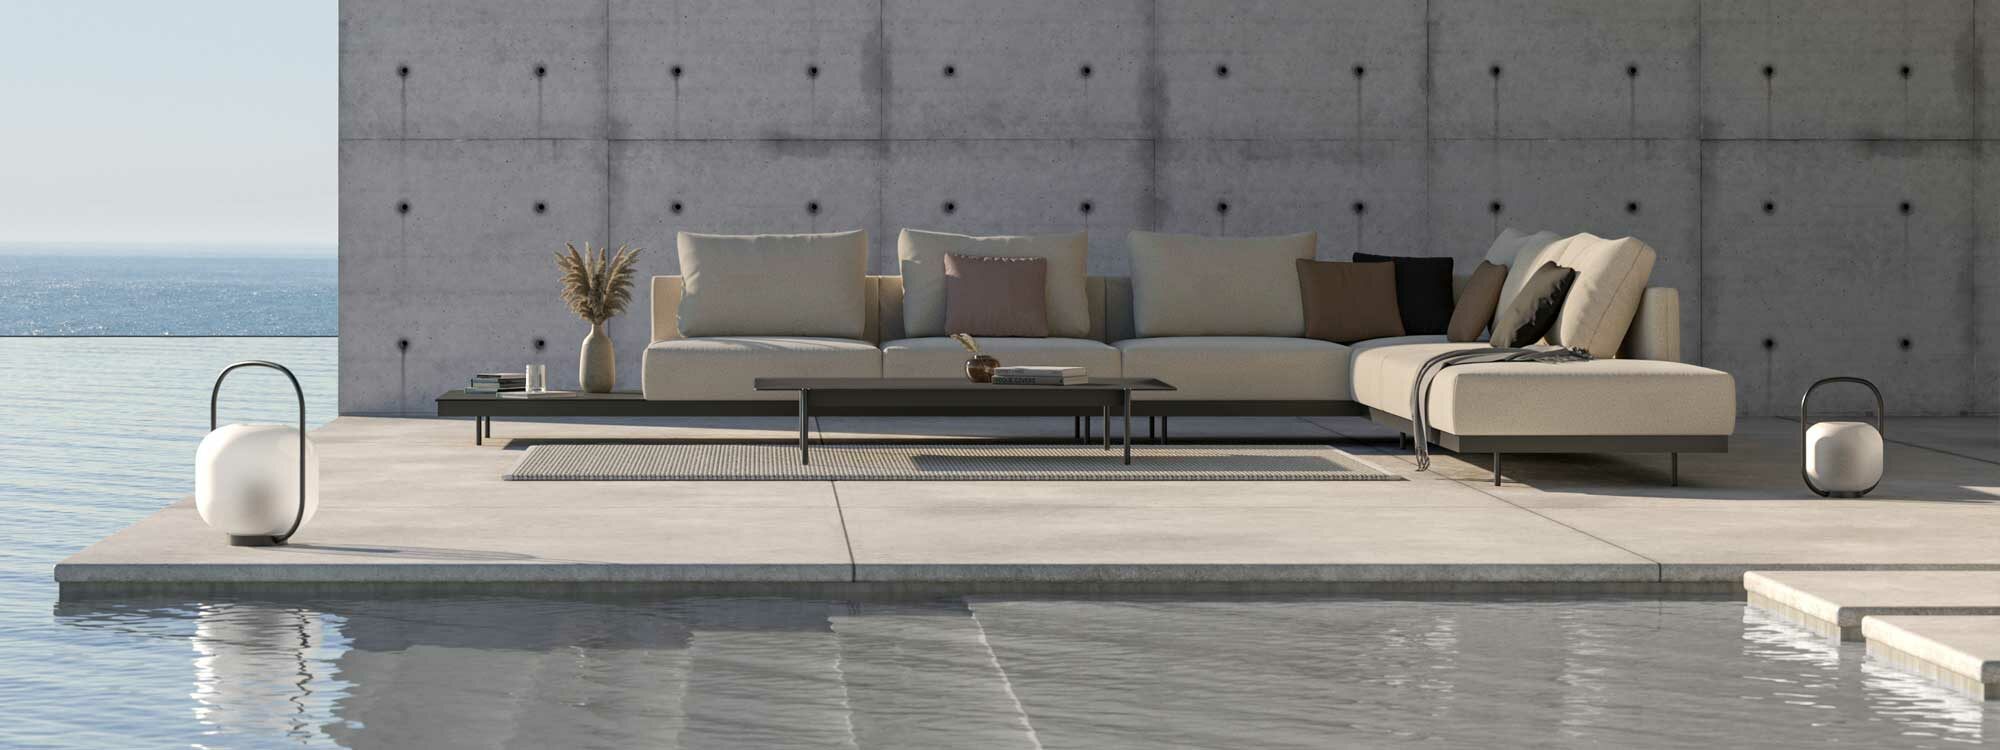 Image of Todus Dongo minimalist garden sofa on concrete balcony, with brutalist architecture and sea in the background